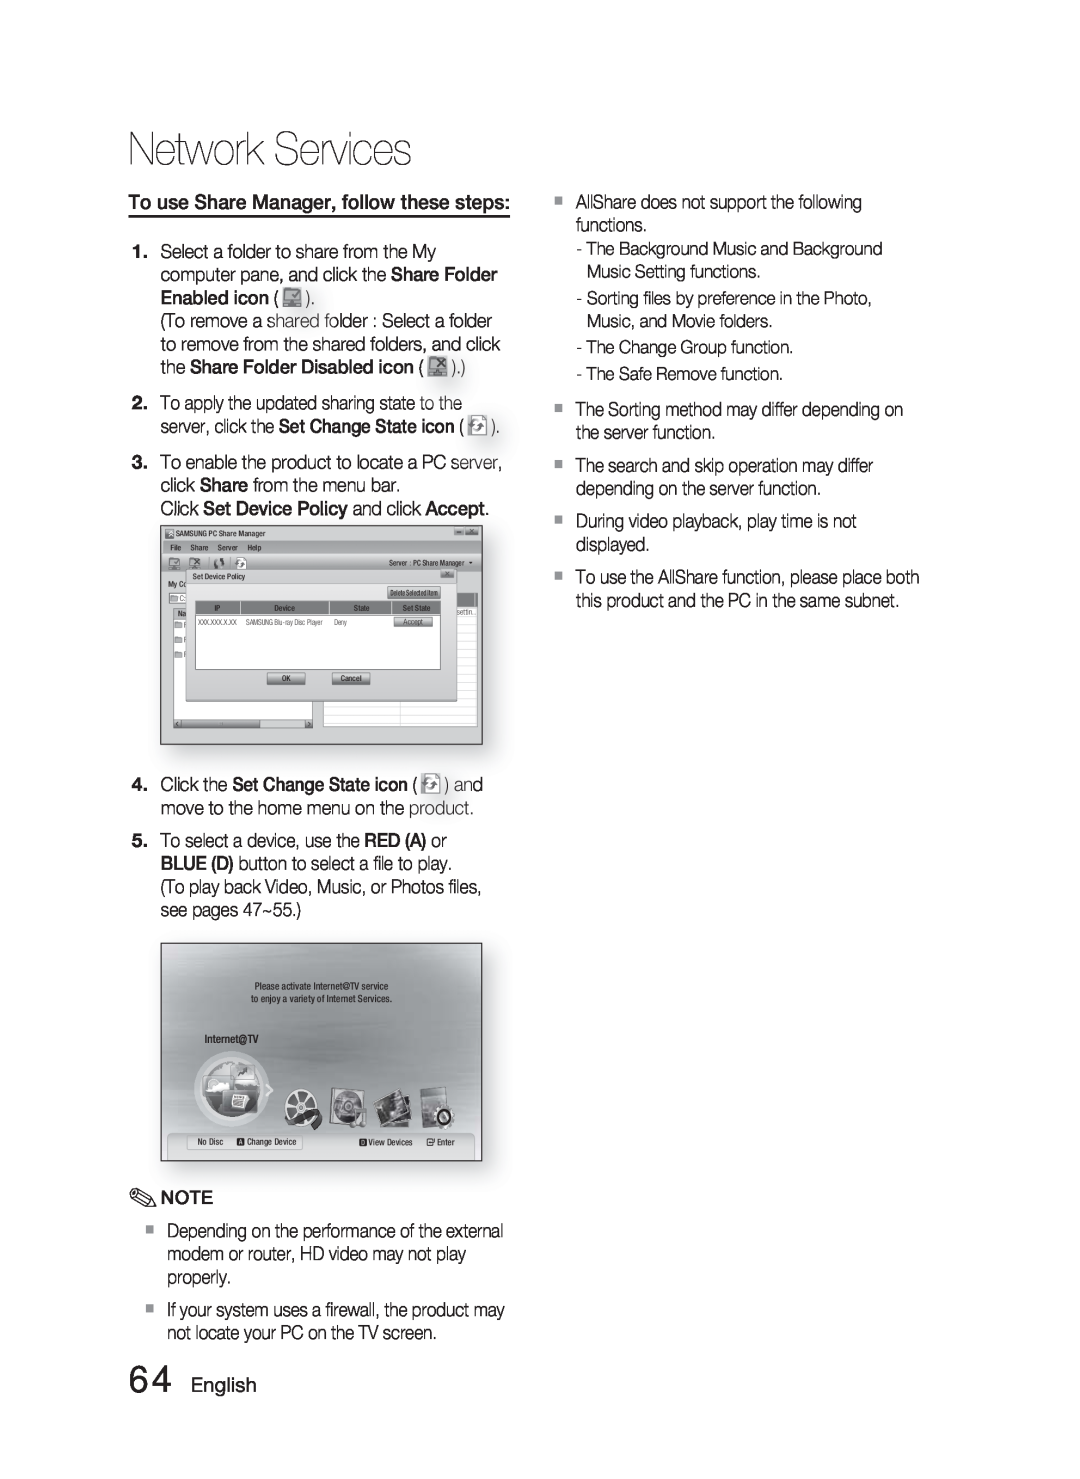 Samsung HT-C6900W user manual English, Network Services 